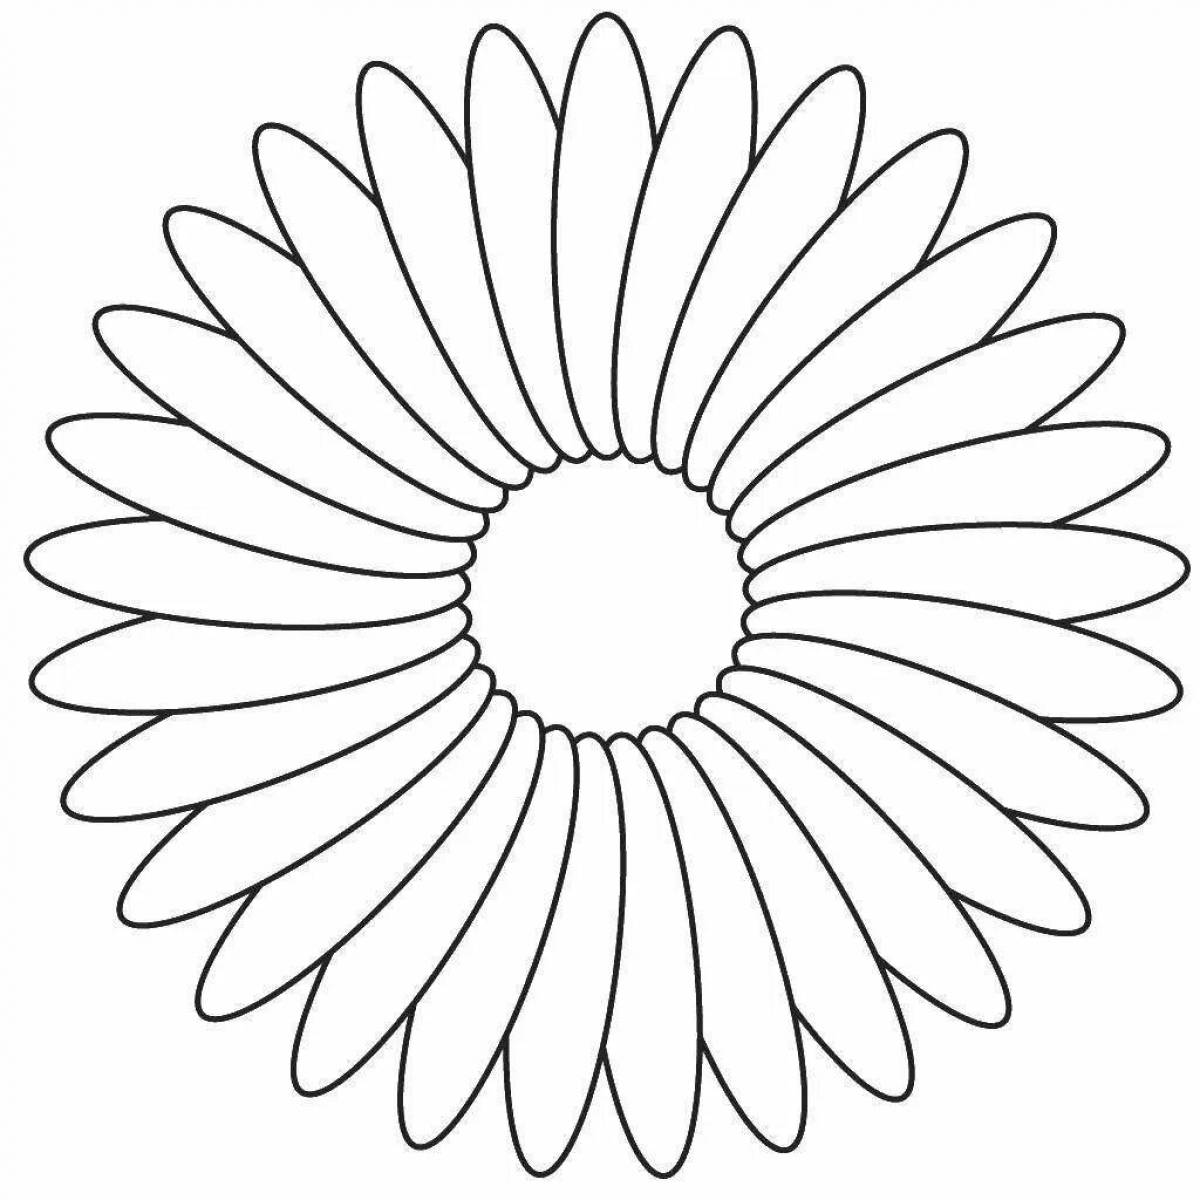 Coloring book bright chamomile flower